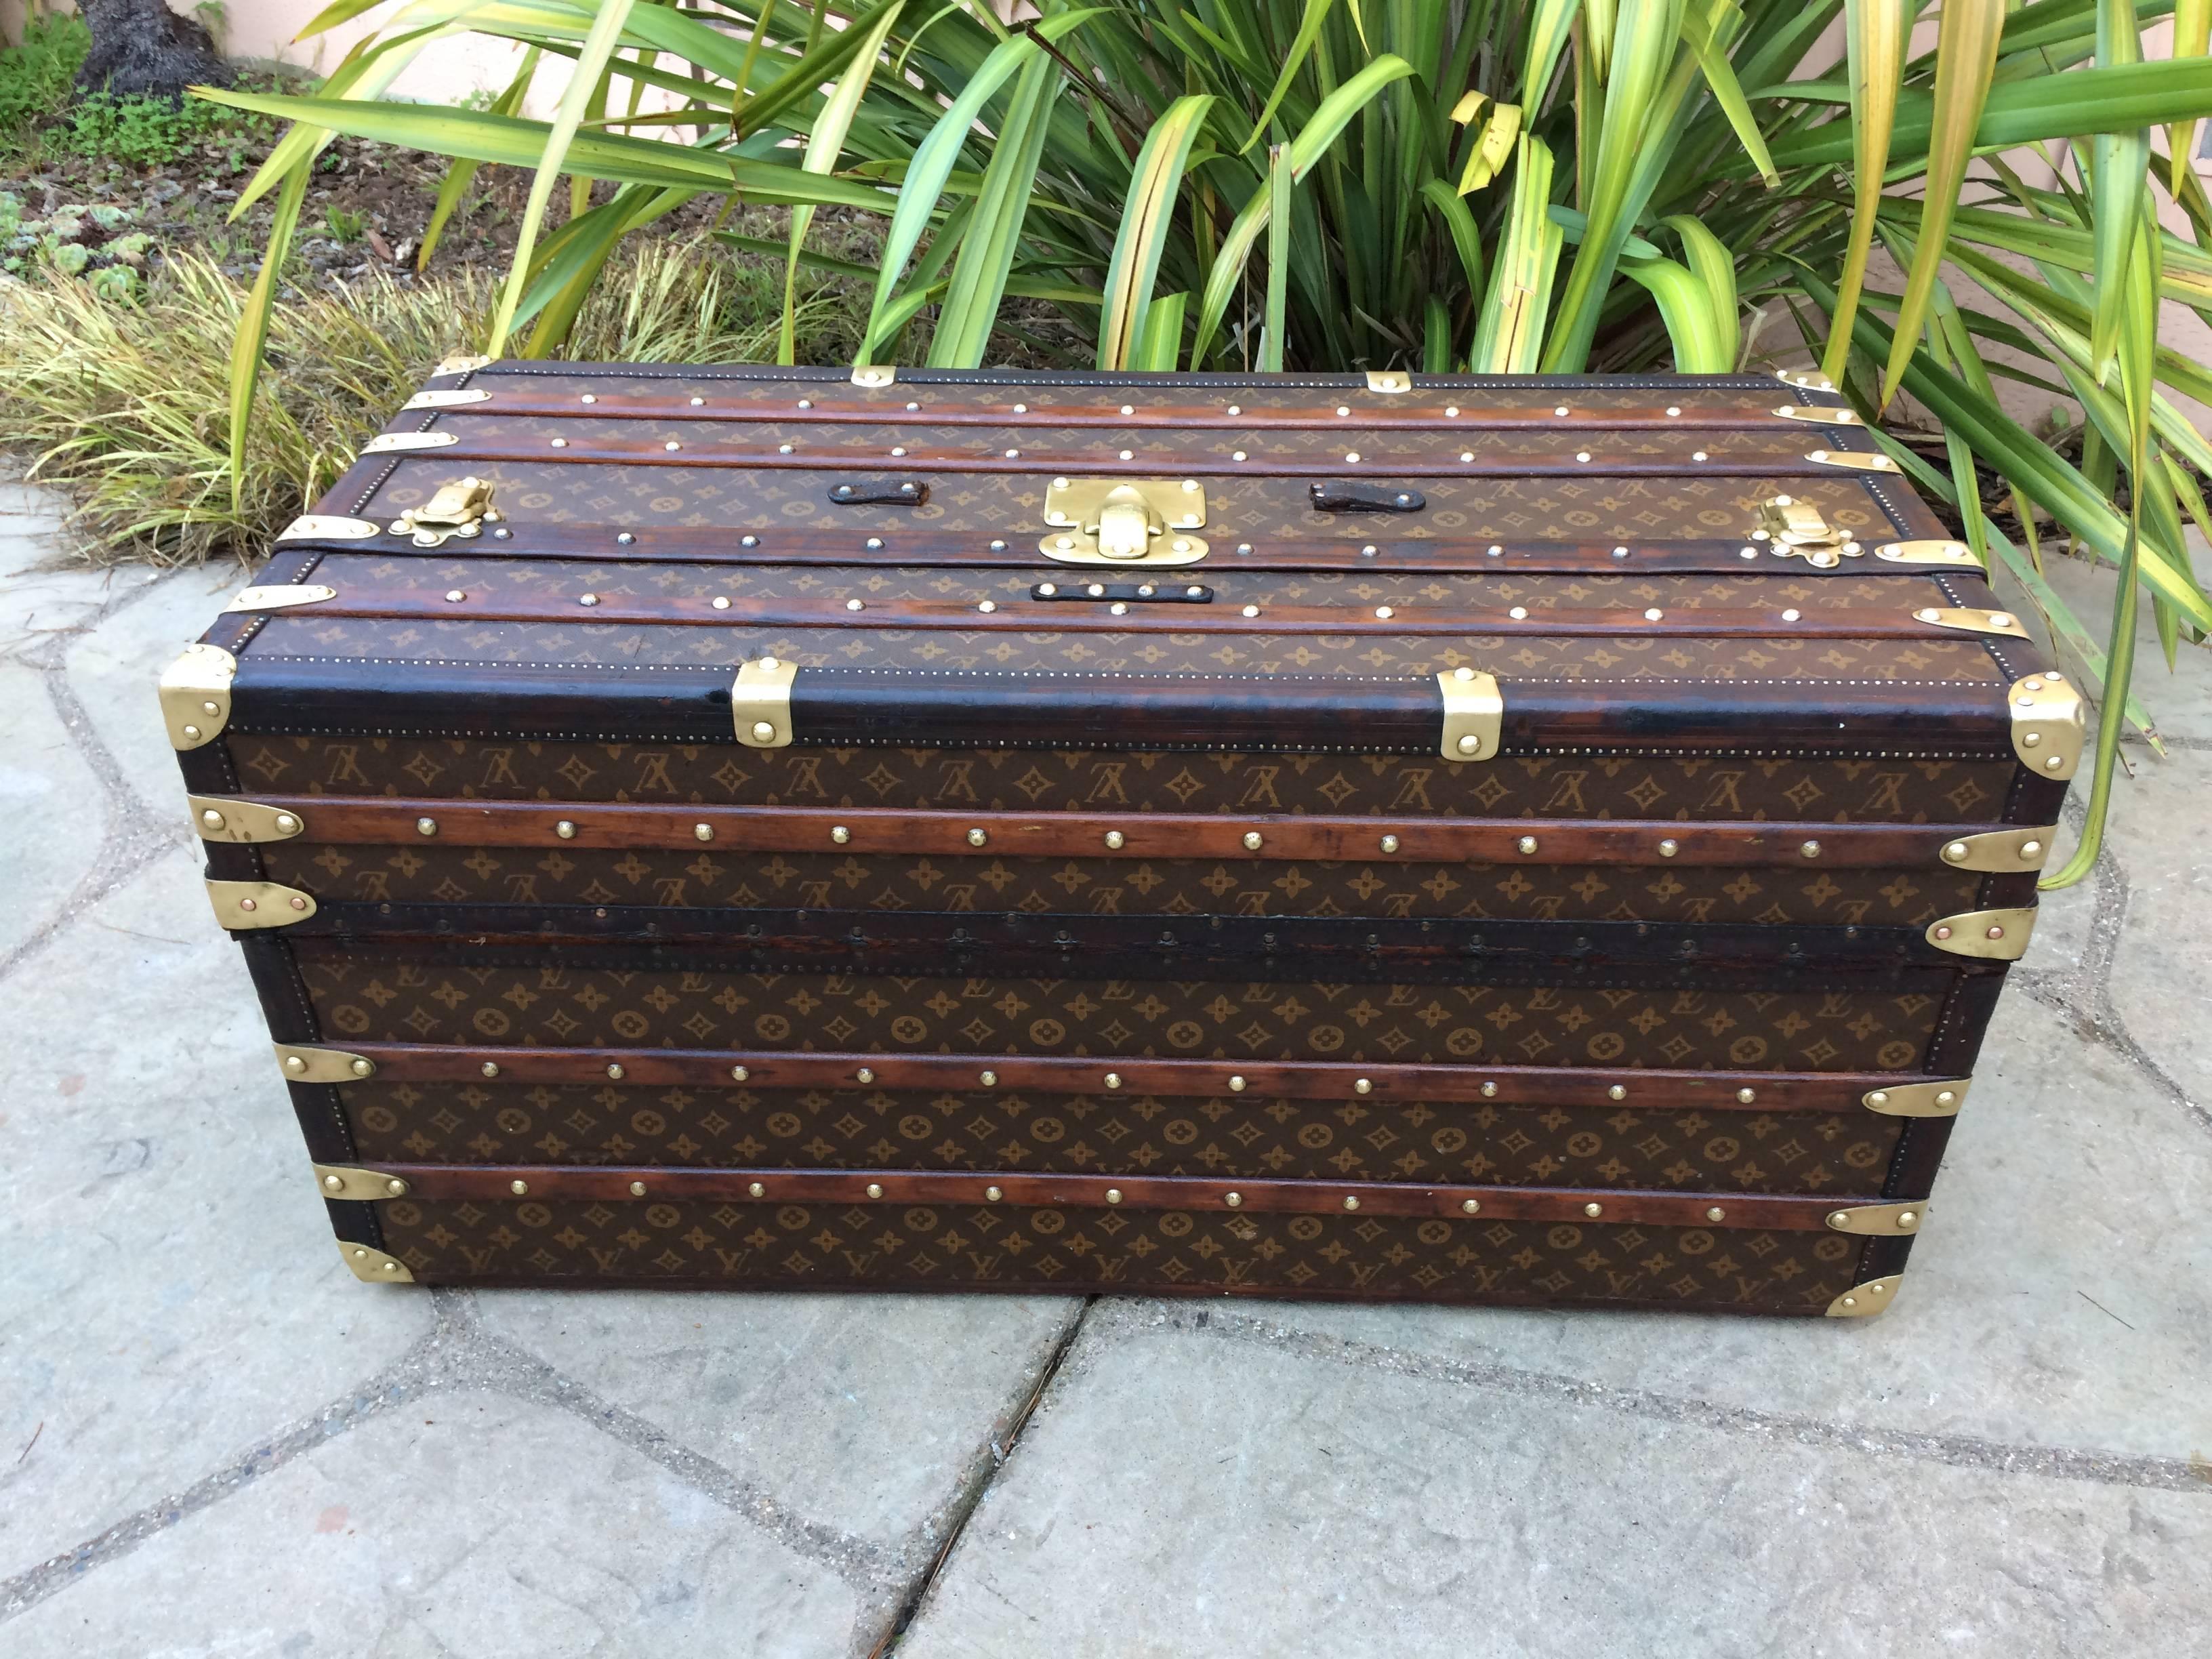 Antique Louis Vuitton Ideal Steamer Wardrobe Travel Trunk Suitcase Purse Goyard In Excellent Condition For Sale In Carmel-by-the-sea, CA